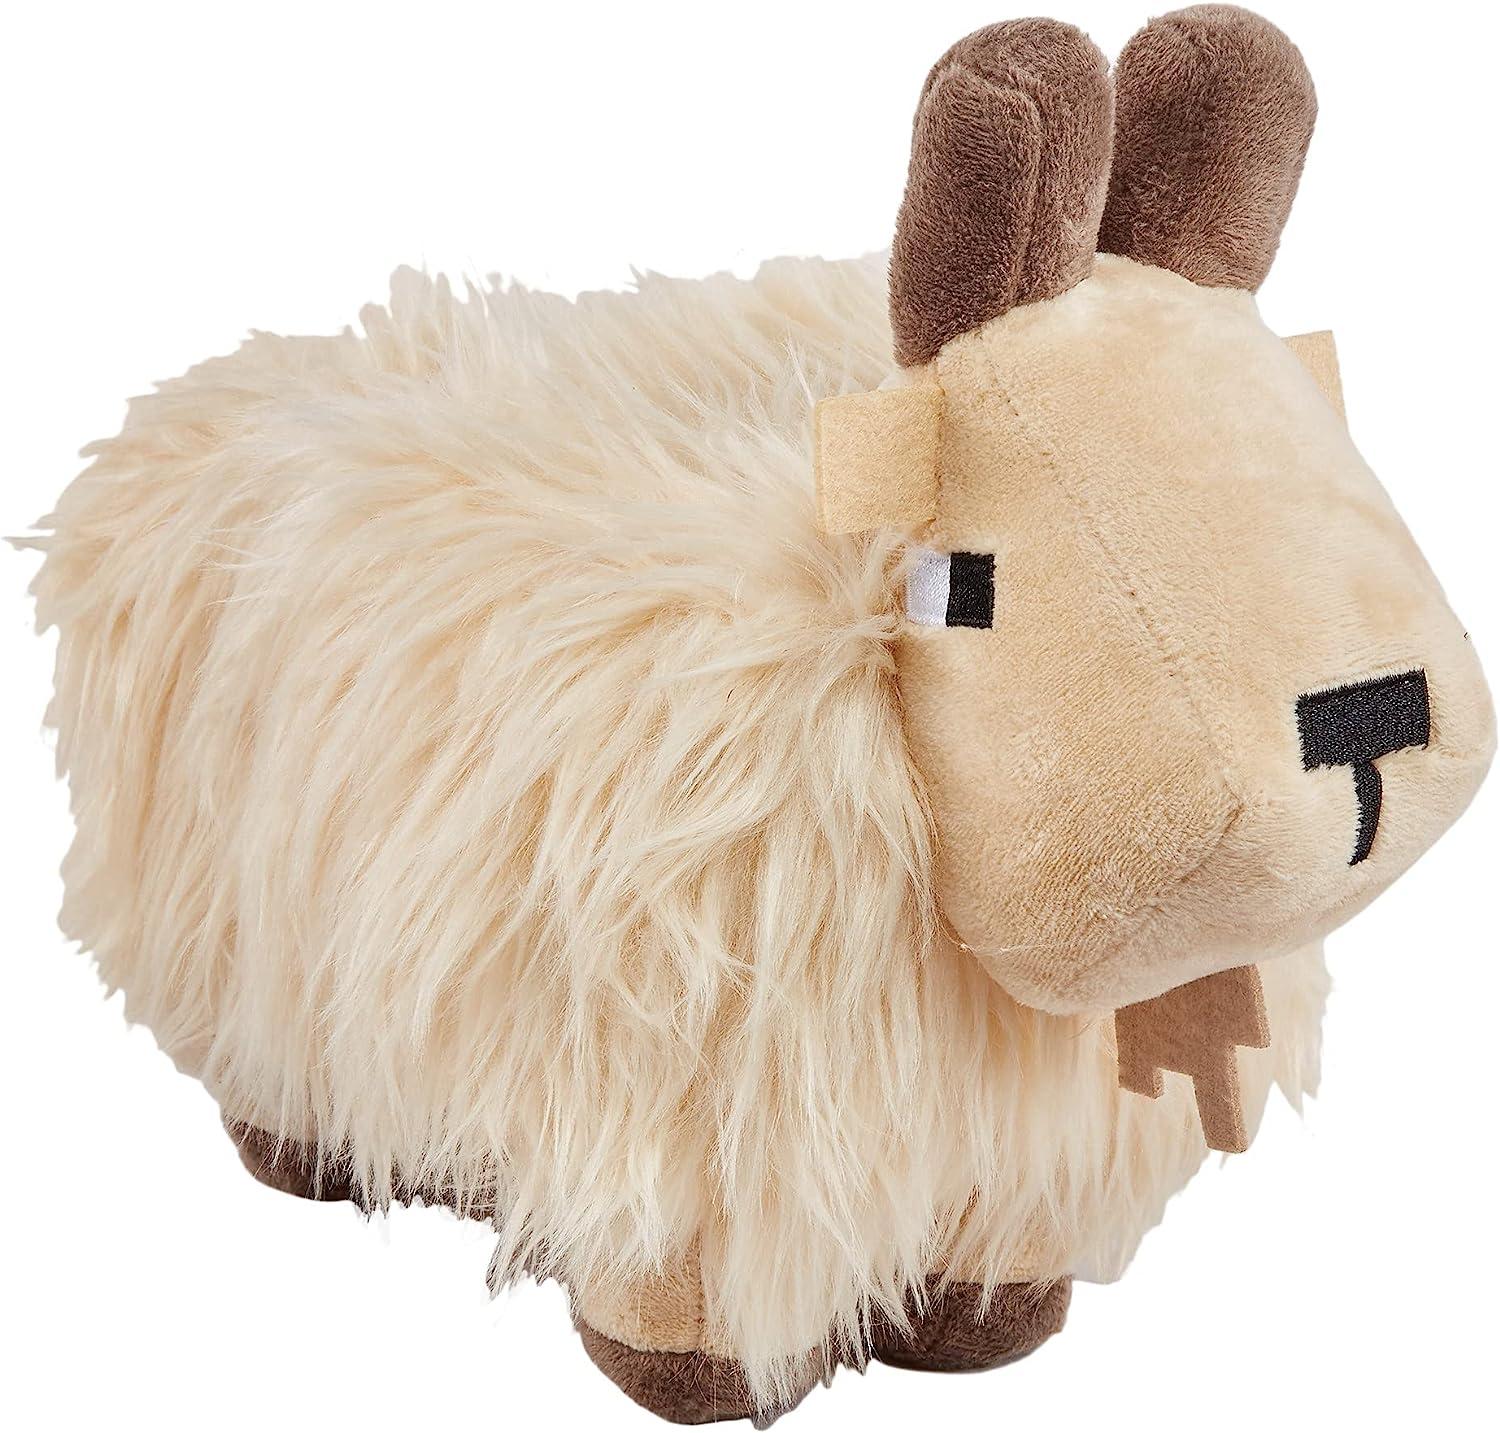 Mattel Minecraft Mountain Goat Collectible Plush for $9.77